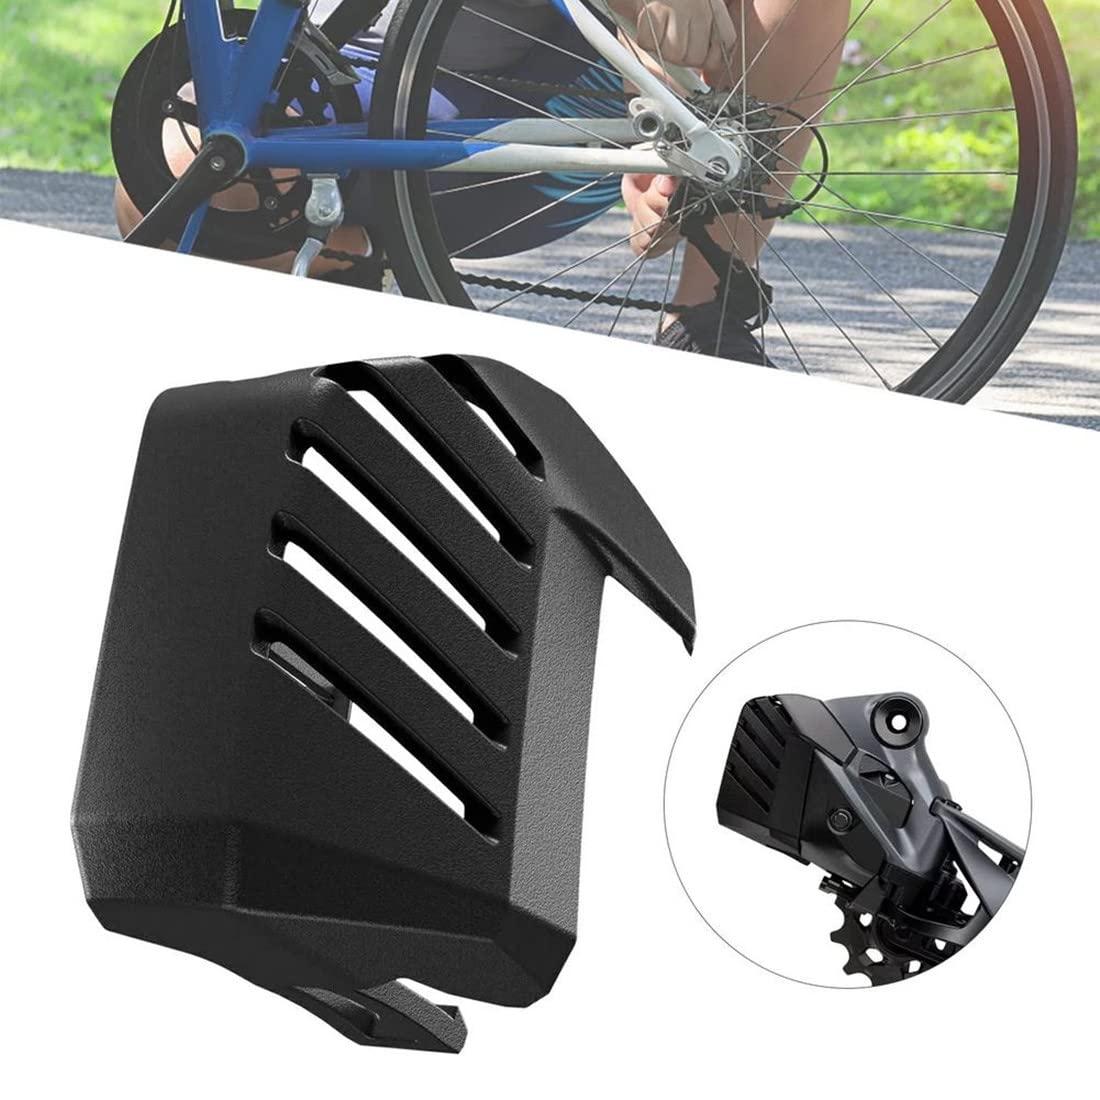 Derailleur Battery Cover for Sram AXS GX X01/EAGLE/XX1/ AXS Bike Battery  Protector Cover Prevent